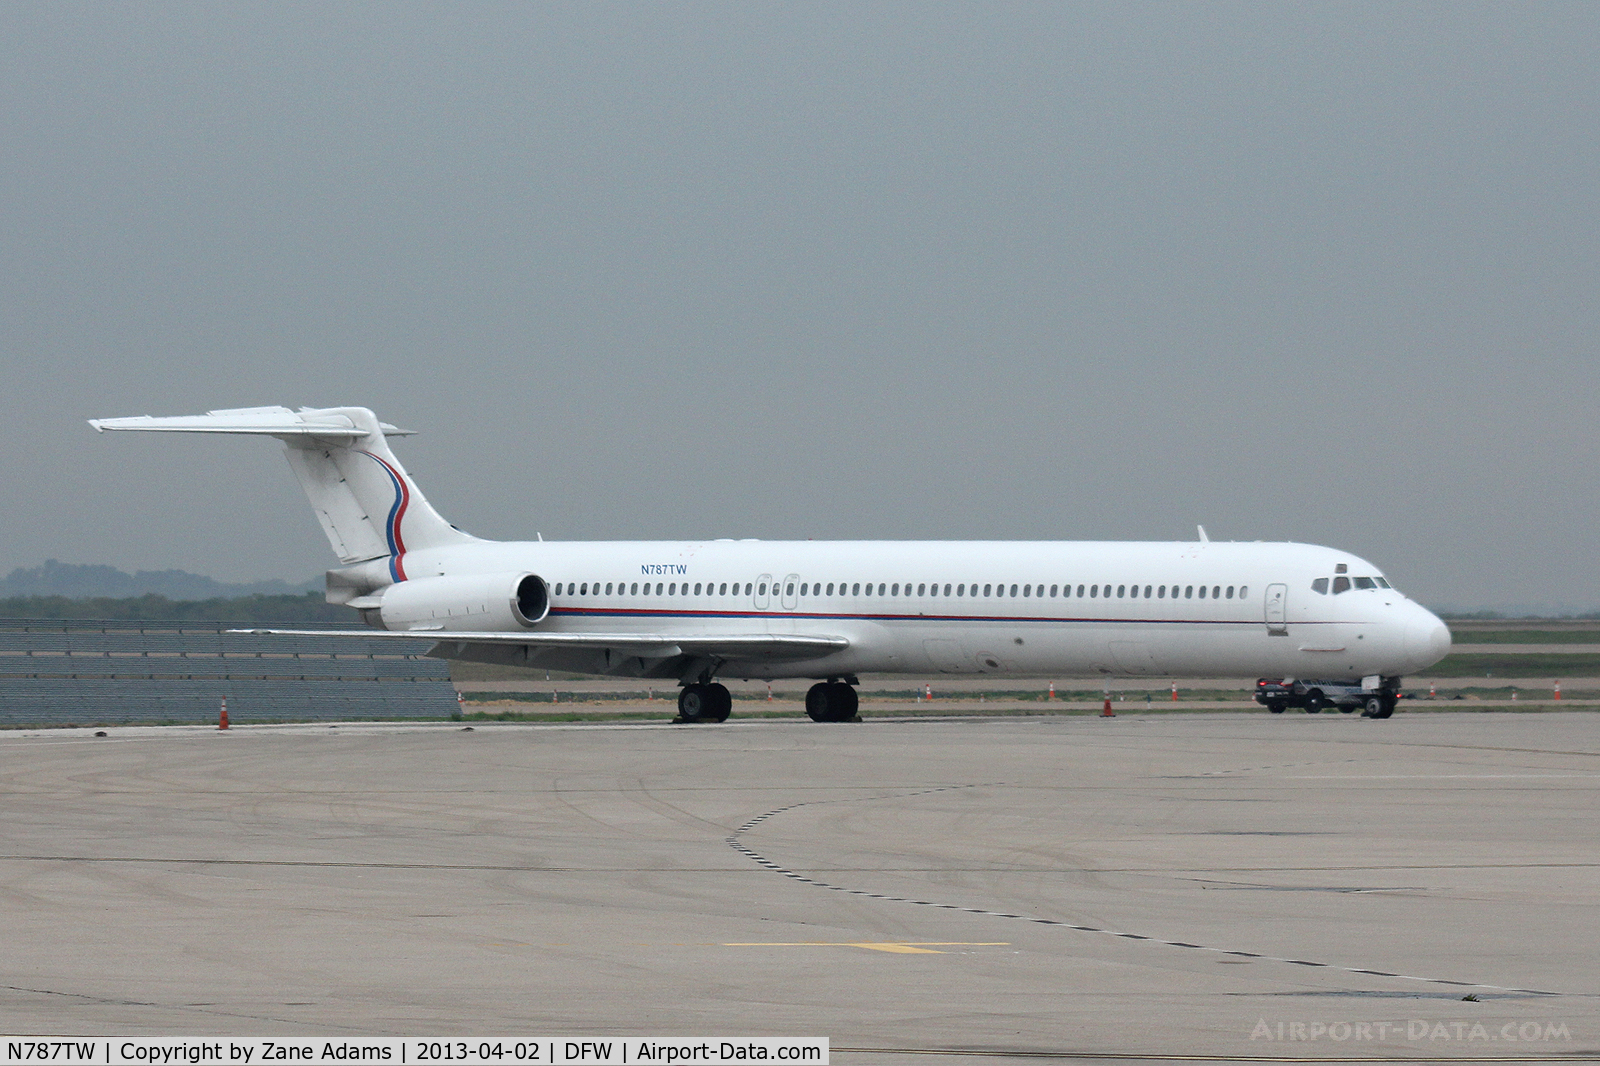 N787TW, 1991 McDonnell Douglas MD-83 (DC-9-83) C/N 49945, At DFW Airport